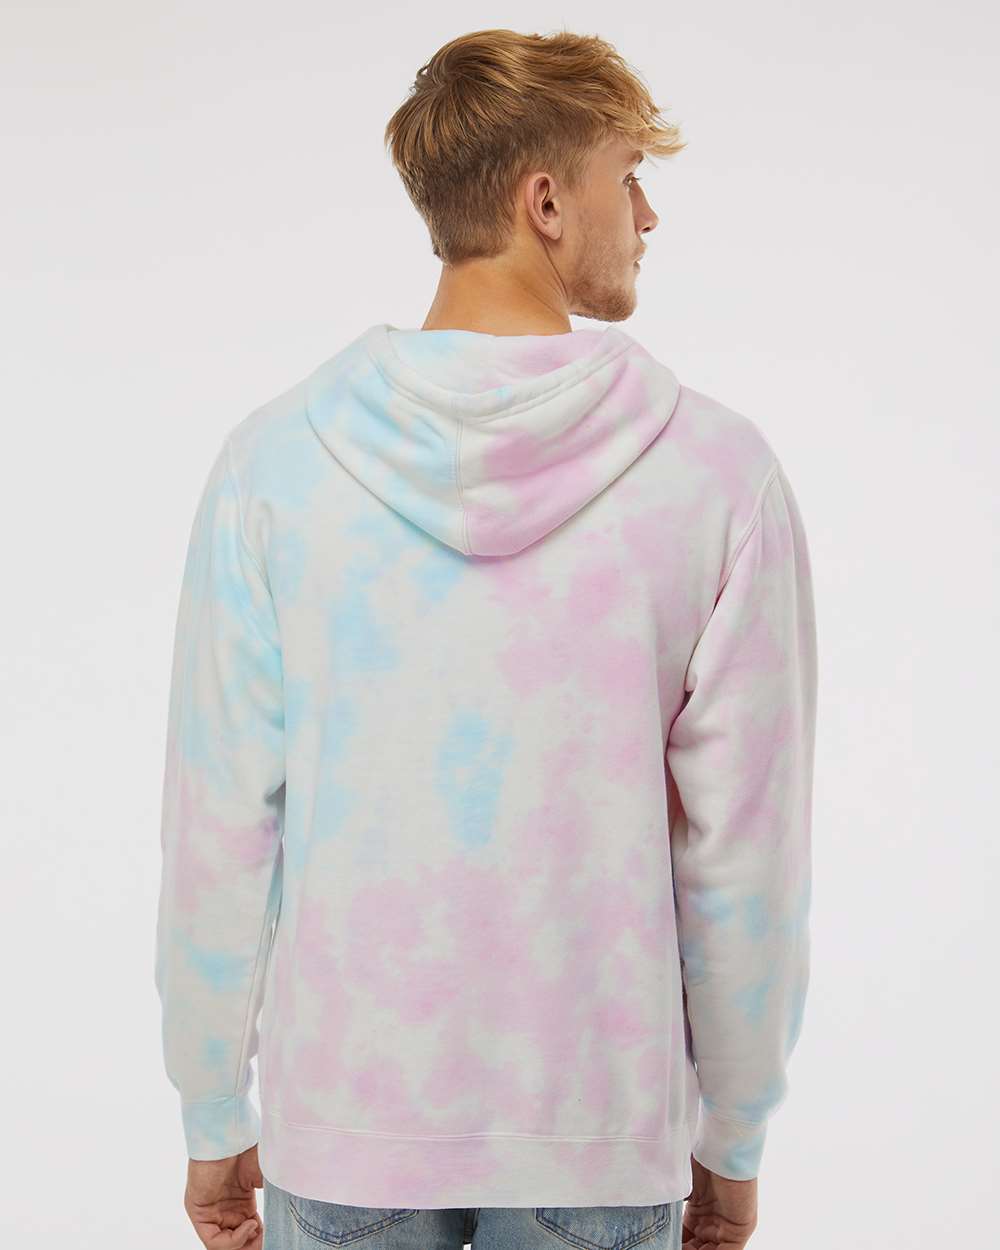 #colormdl_Tie Dye Cotton Candy